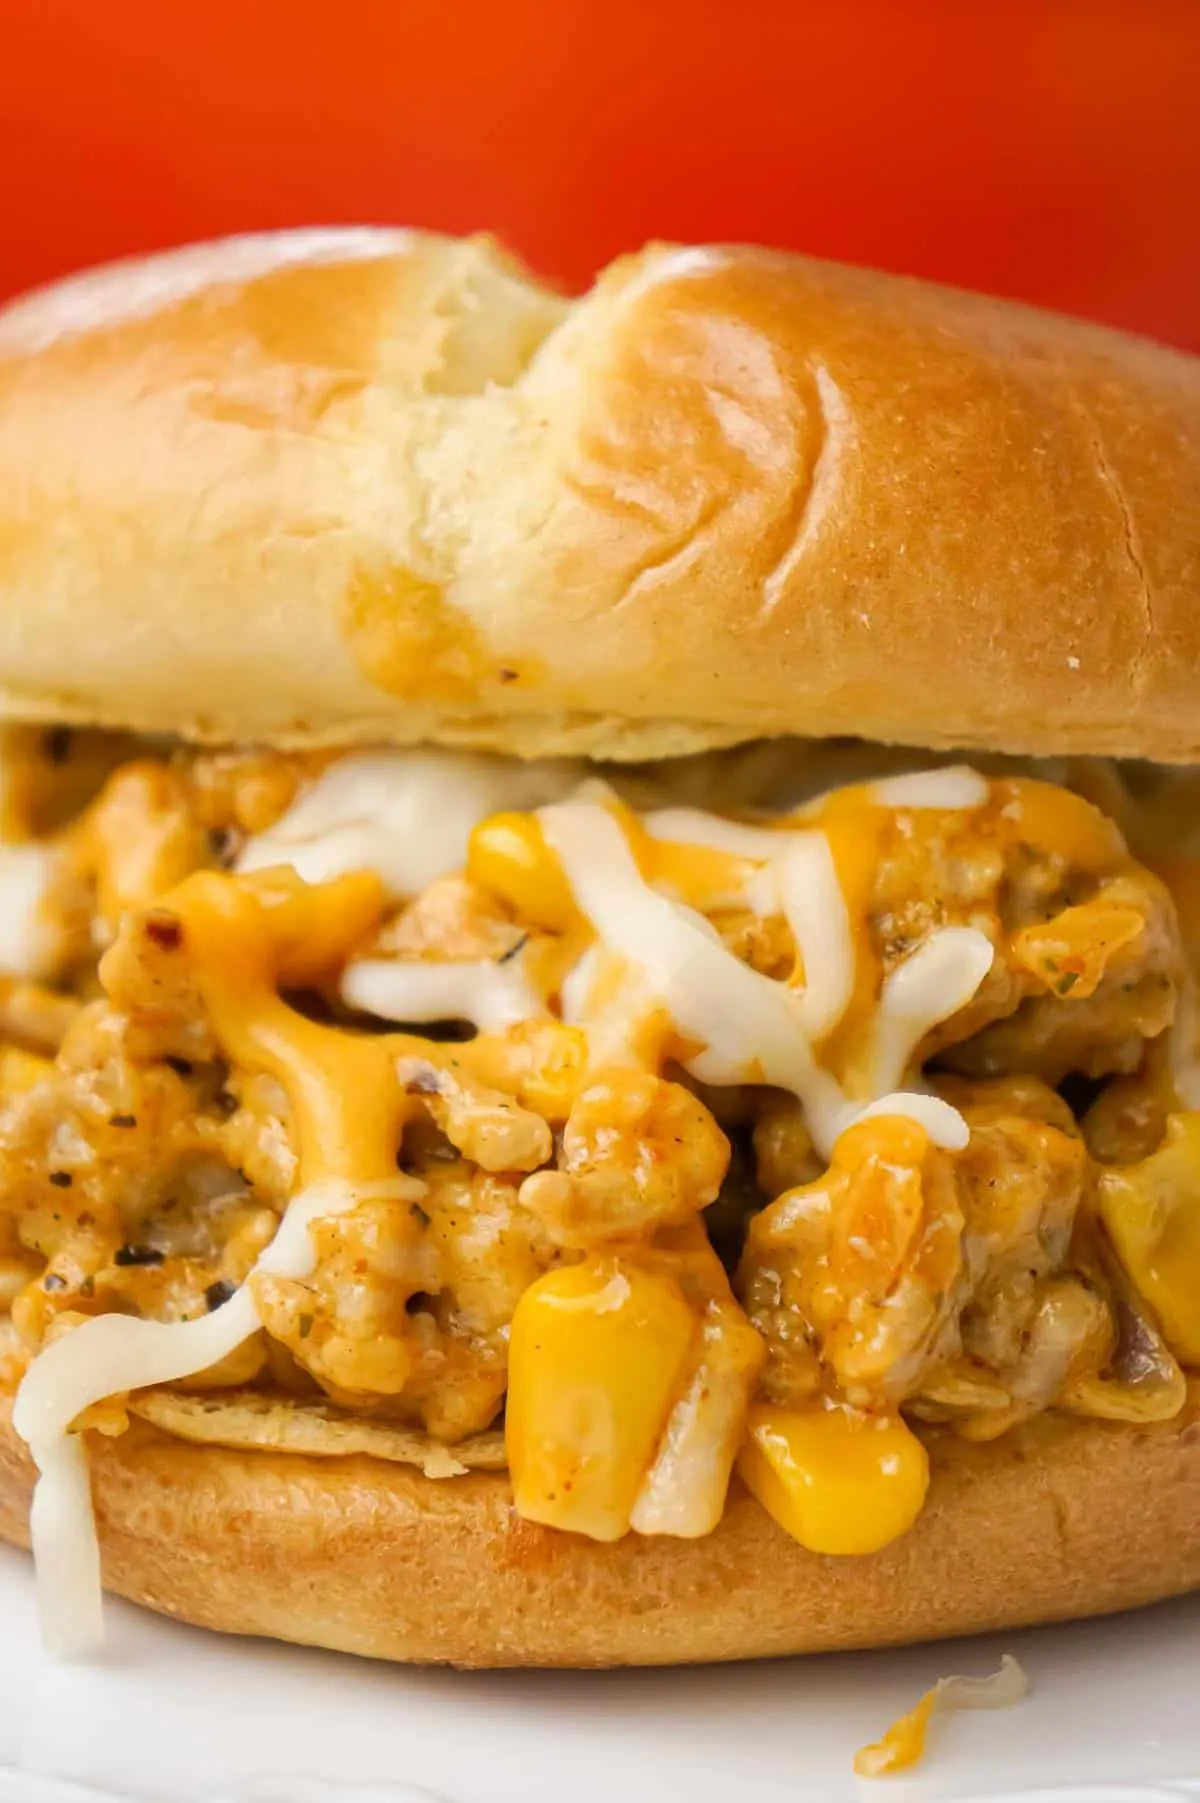 Cajun Chicken Sloppy Joes are an easy dinner recipe using ground chicken and loaded with corn, red onions, cream of chicken soup, Cajun seasoning and shredded cheese.